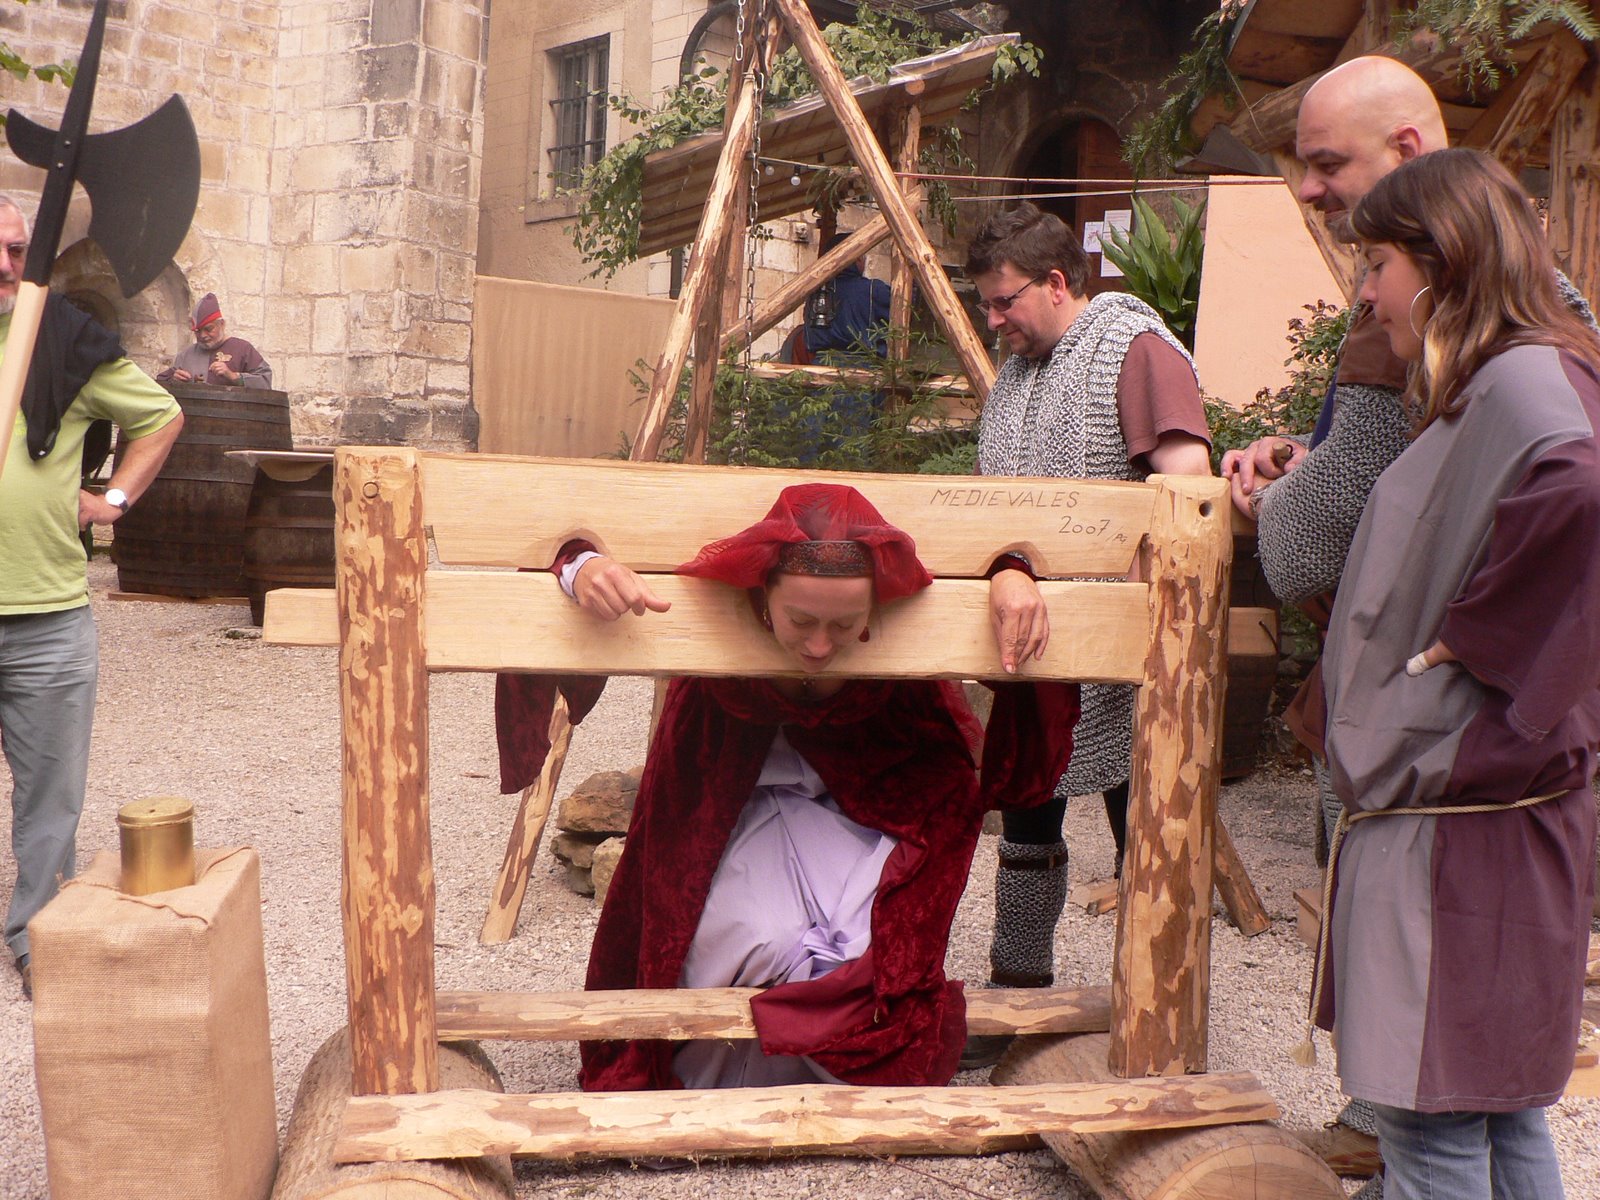 And what fair would be complete without stocks, a pillory, or maybe even a ...